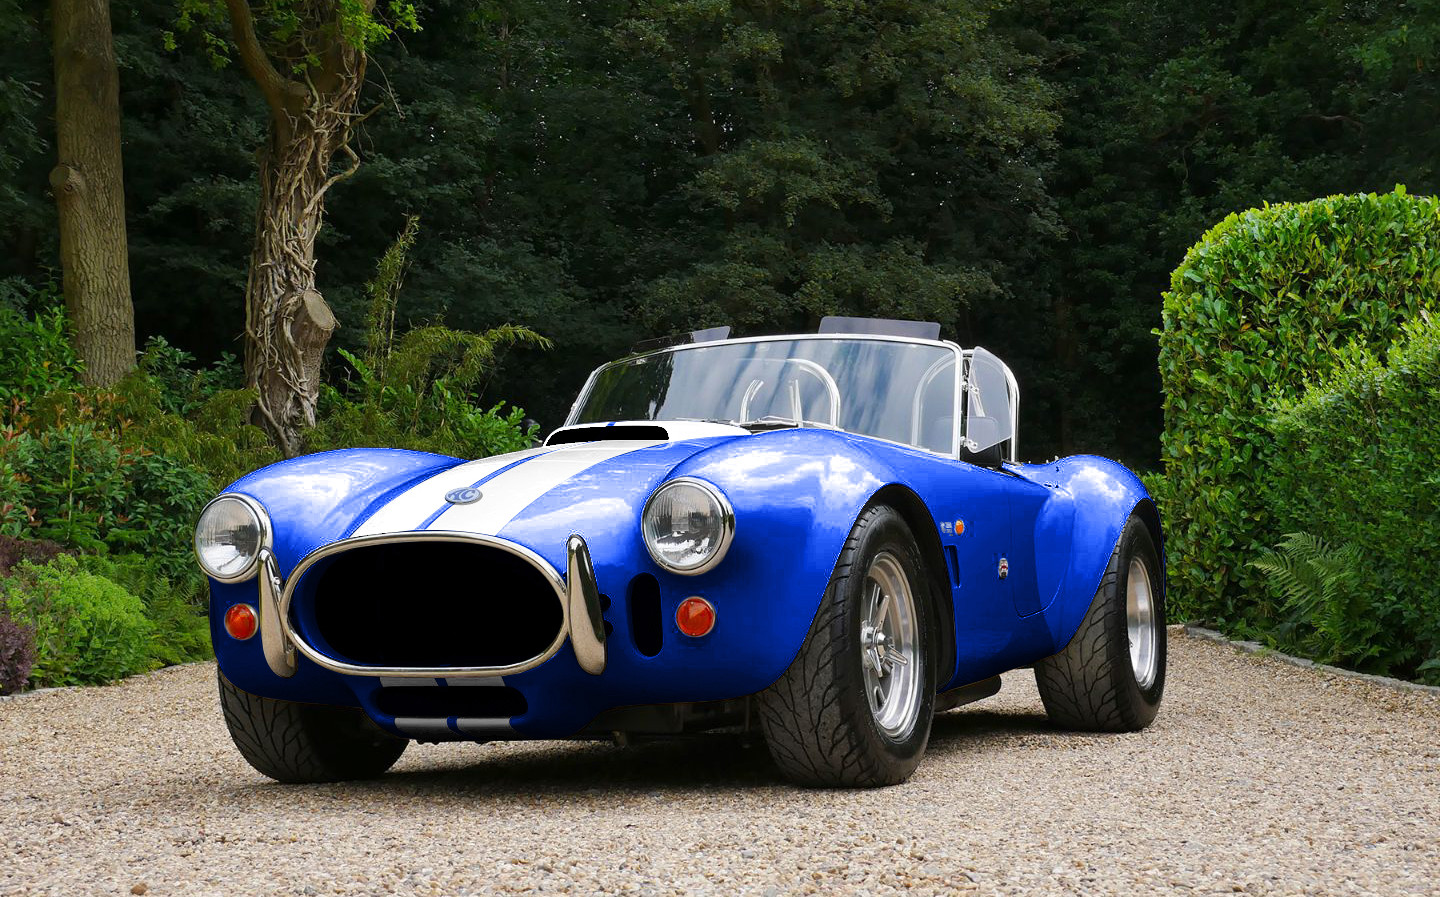 Entry level electric AC Cobra 4-electric revealed with 308bhp, 190 miles of range